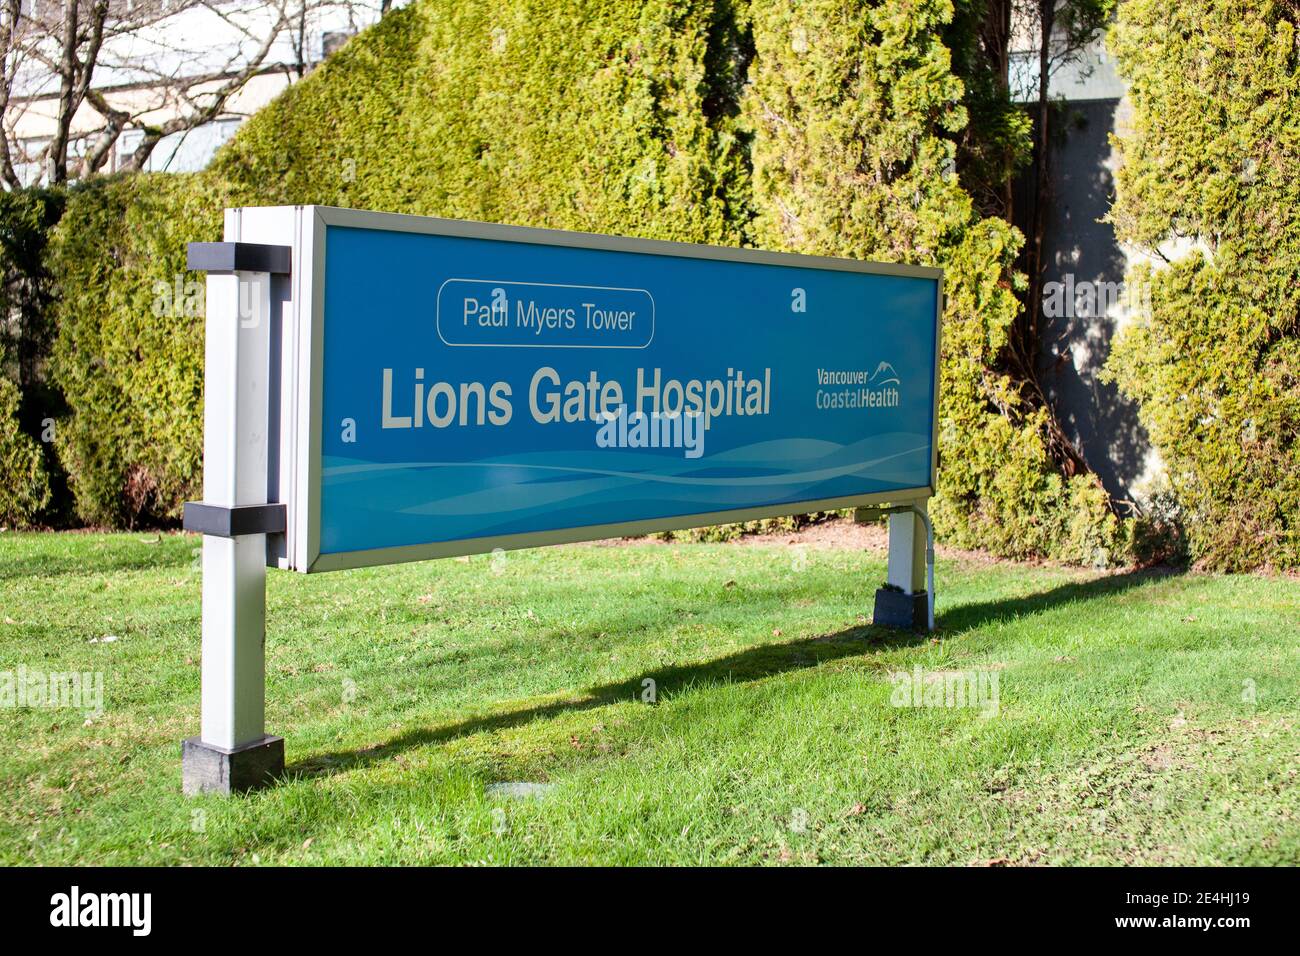 North Vancouver, British-Columbia, Canada - 01-23-2021: The entry way sign to the Lions Gate Hospital, part of the Vancouver Coastal Health authority Stock Photo